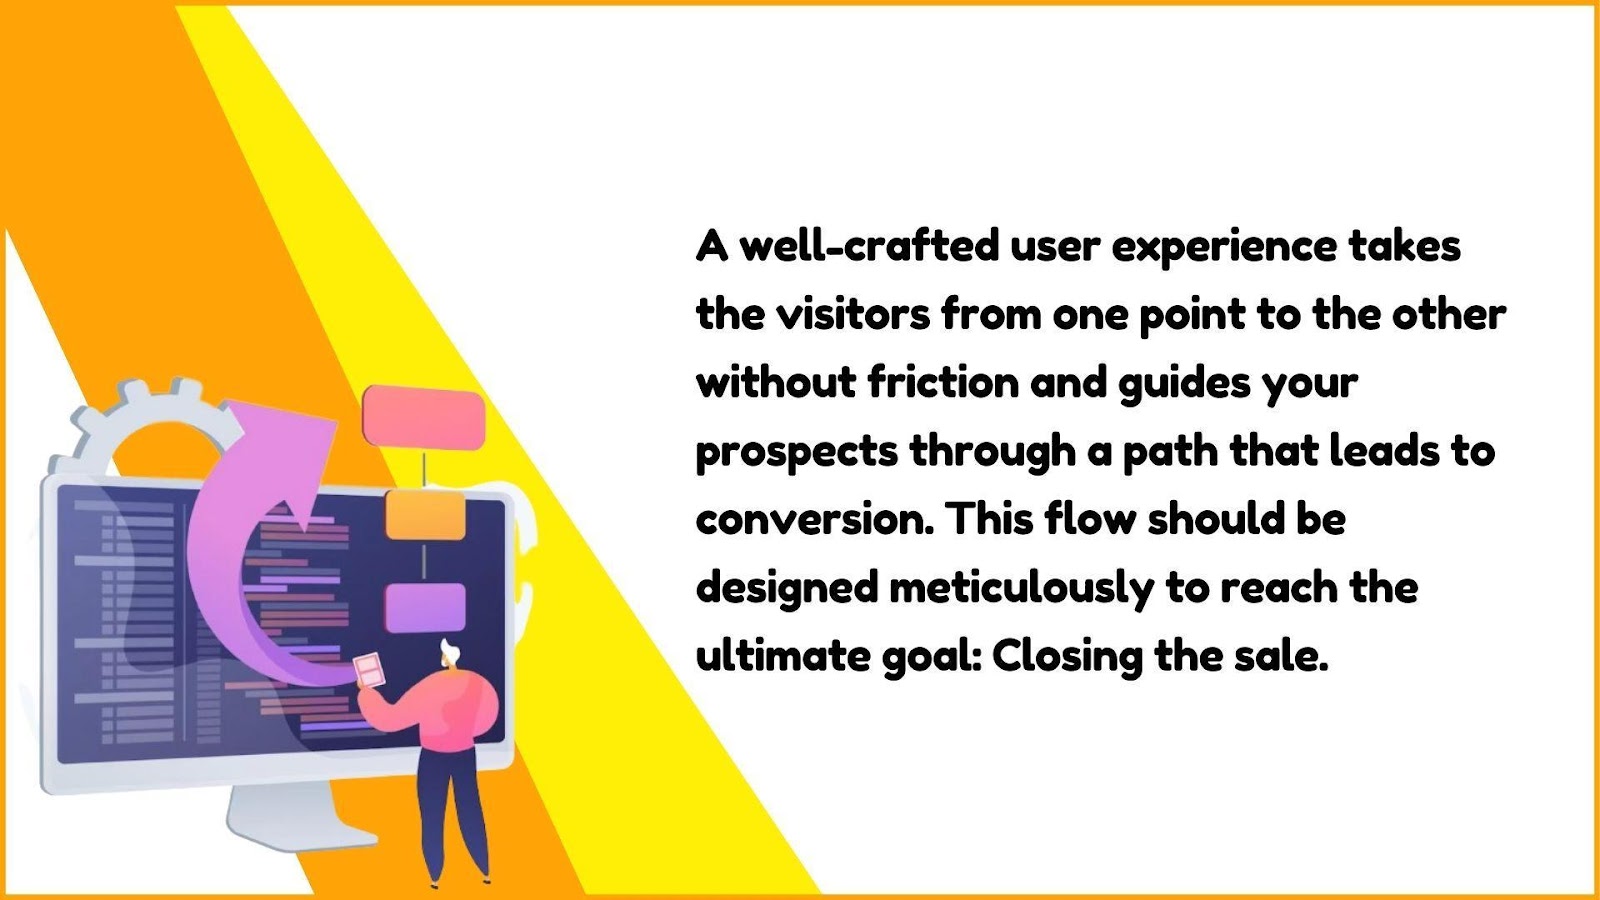 Creating user flow diagrams helps you gain an understanding of user experience and shows you different ways that drive your visitors from the starting point to task completion.